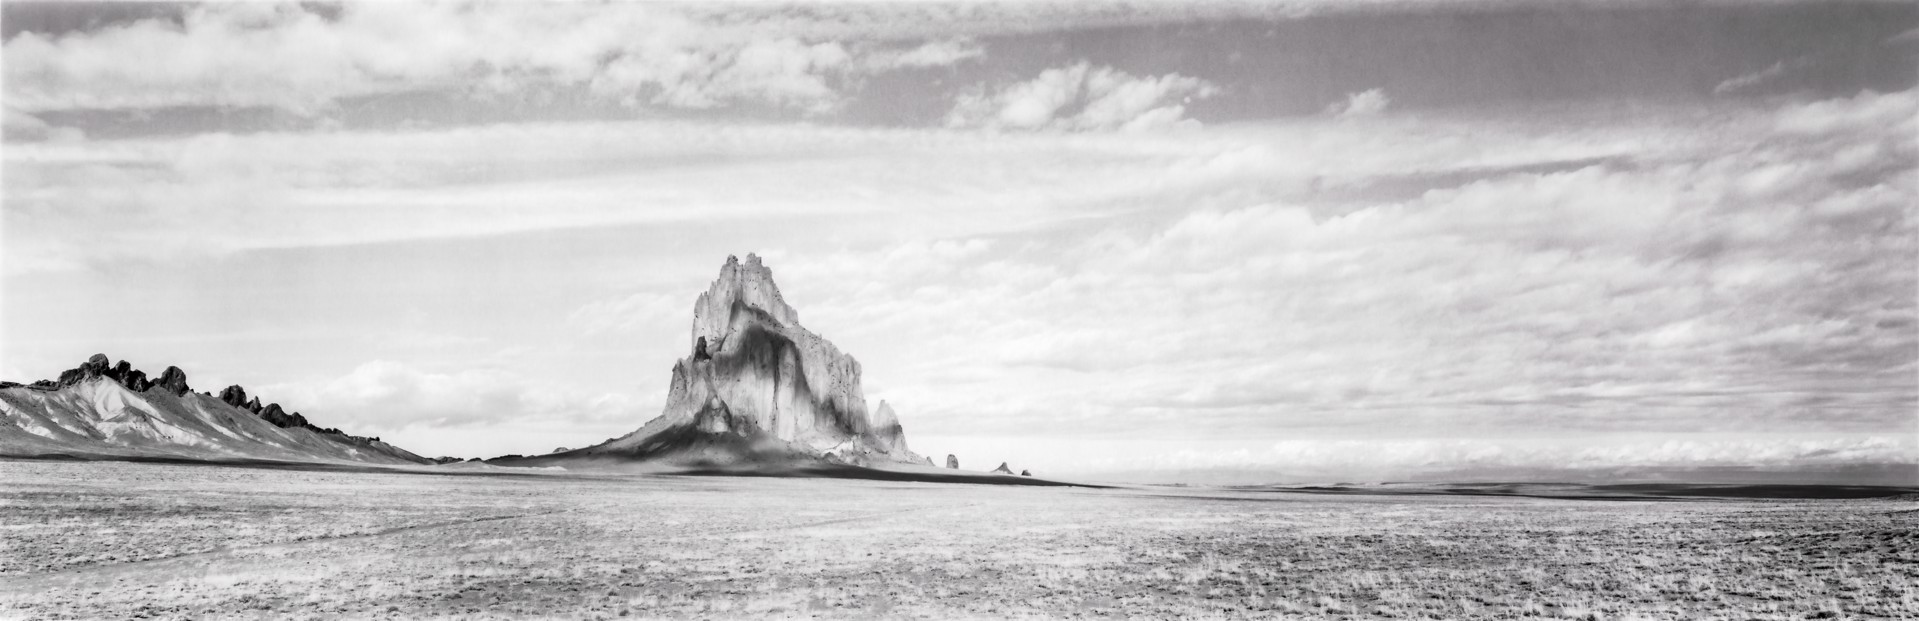 Ship Rock, With Will, Navajo Nation, New Mexico, 1990 (Cultural Vestiges) by Lawrence McFarland